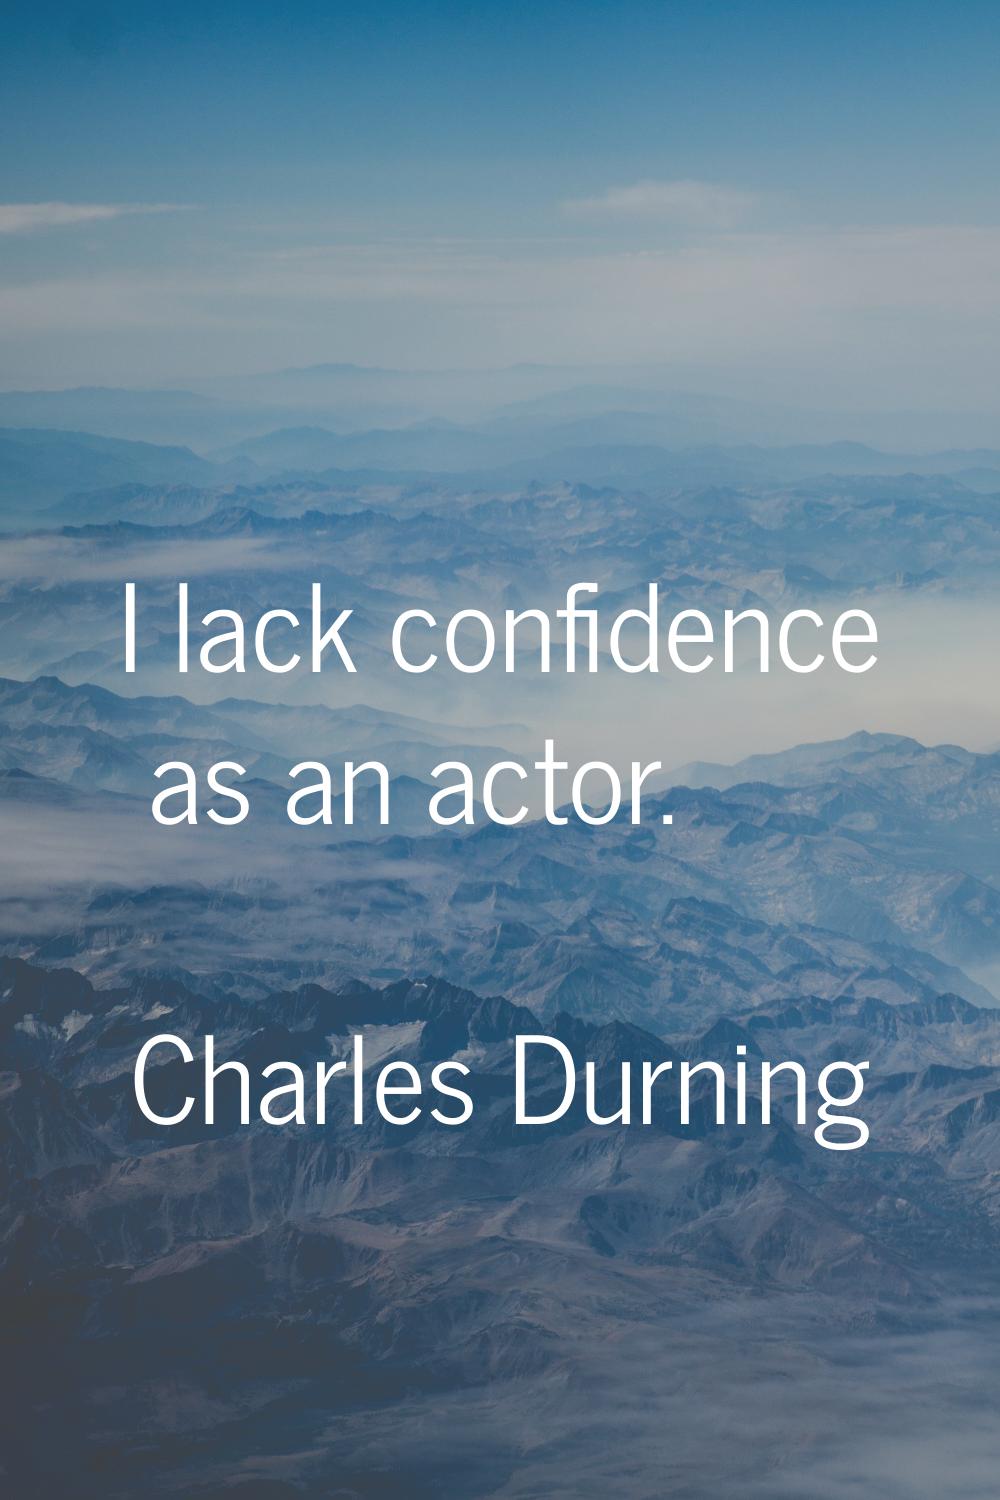 I lack confidence as an actor.